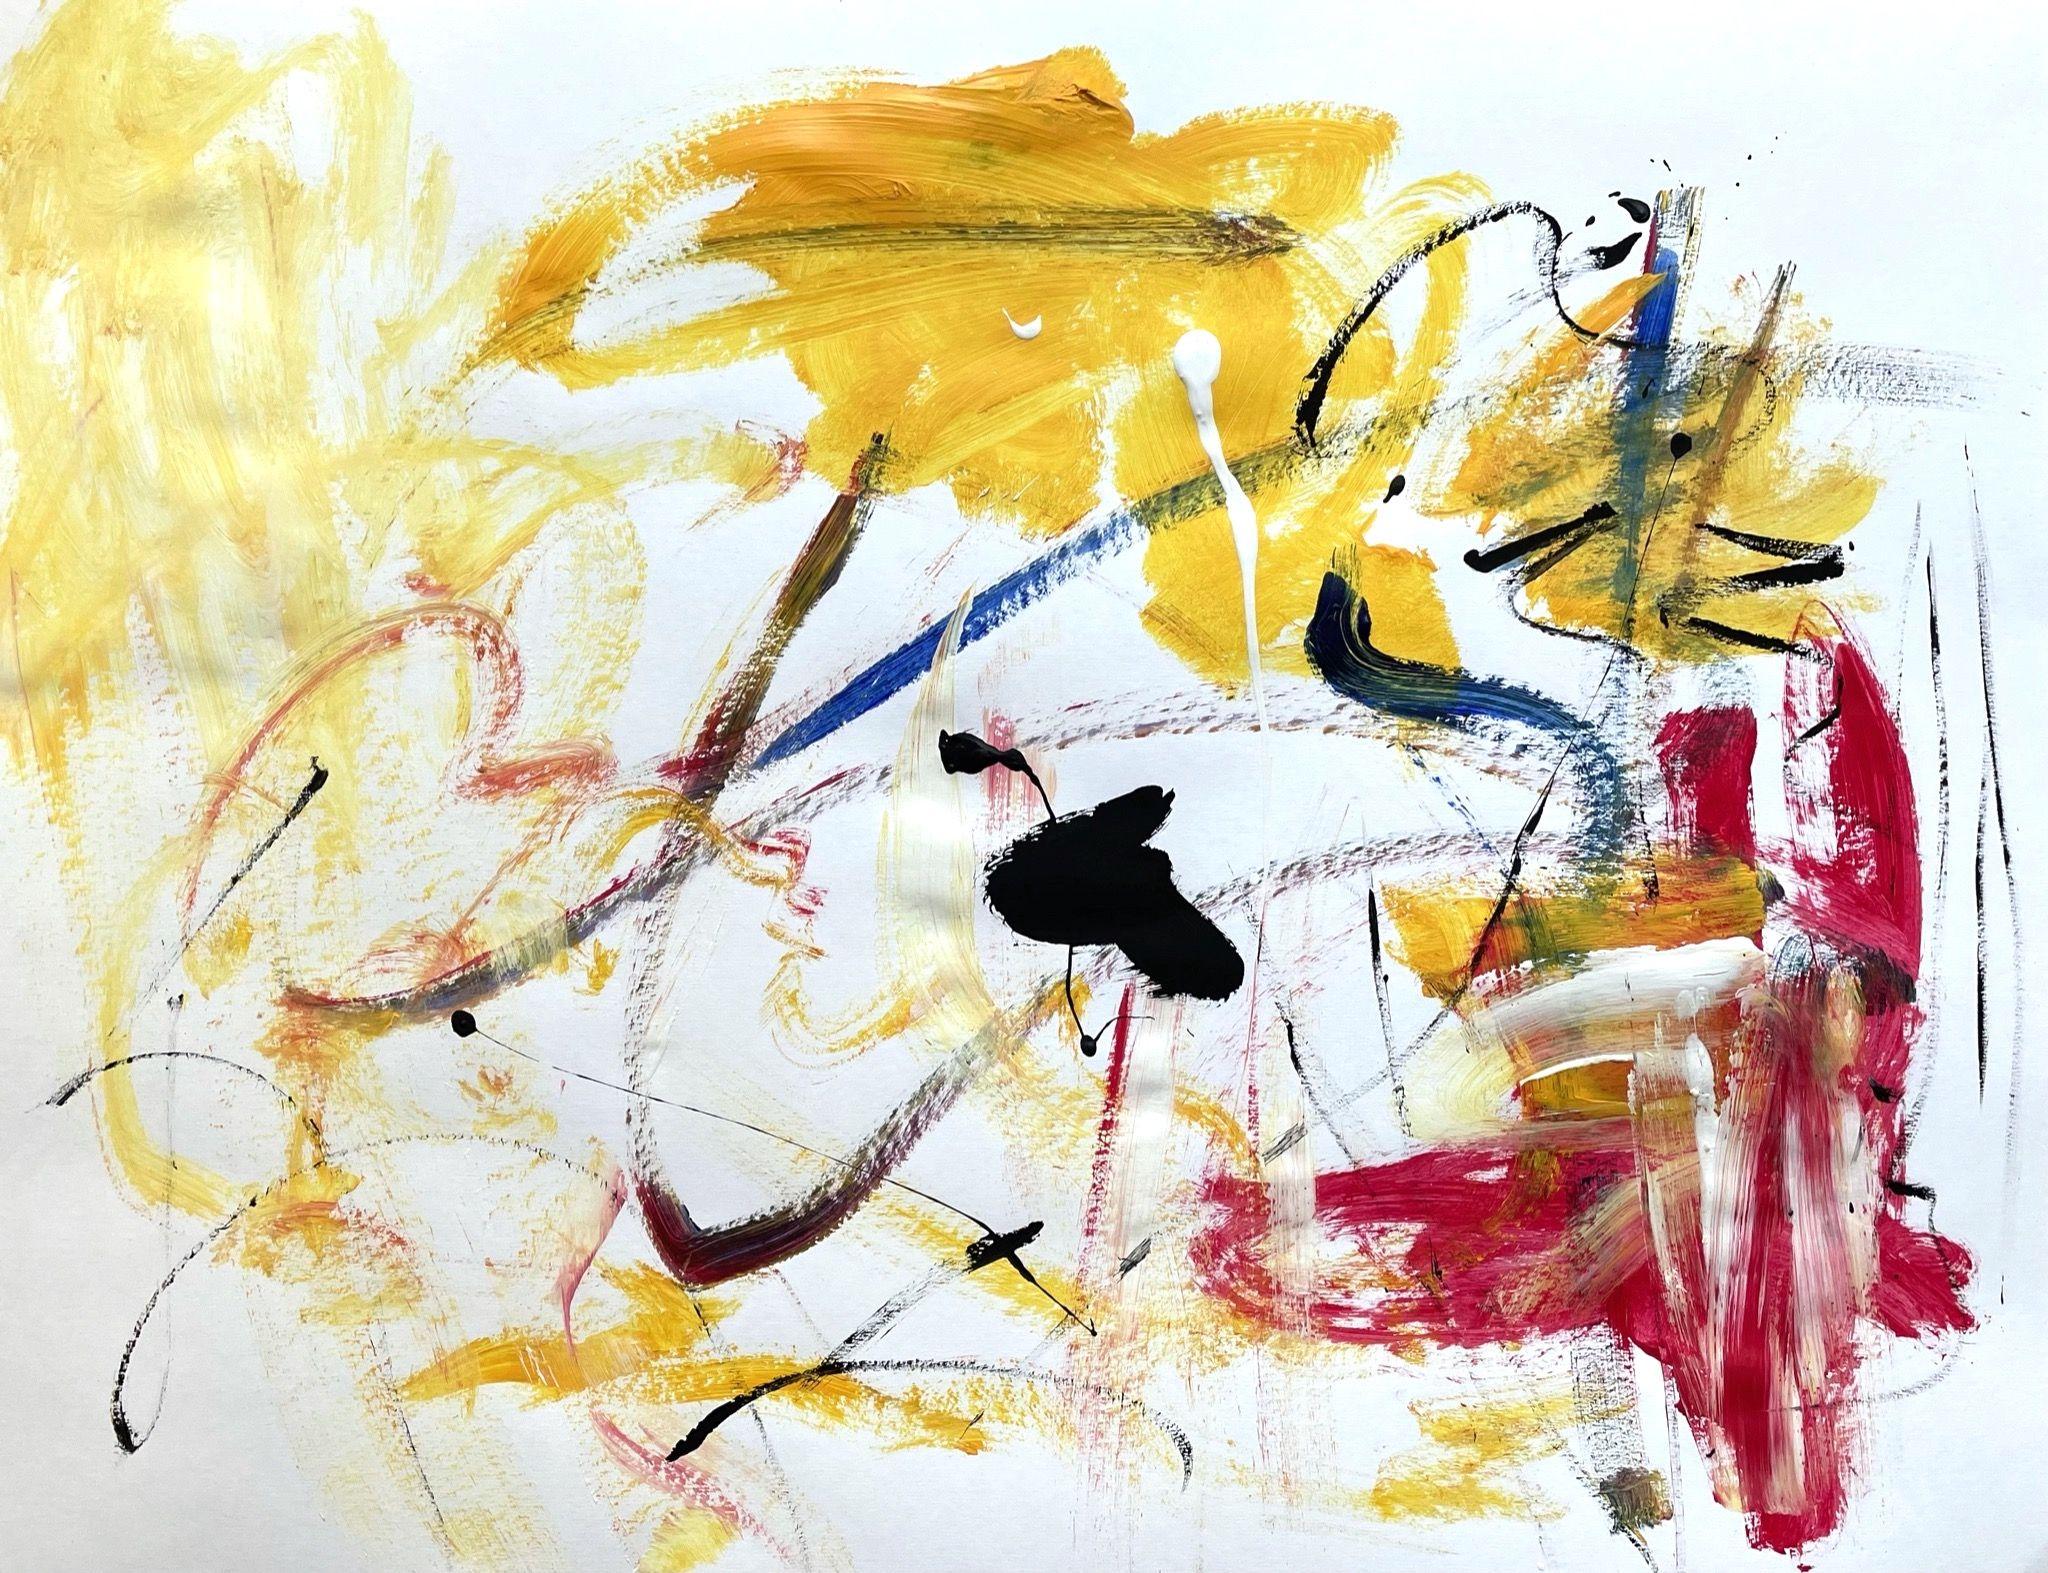 Die Magie des Lebens (Diptych), Painting, Acrylic on Paper 2